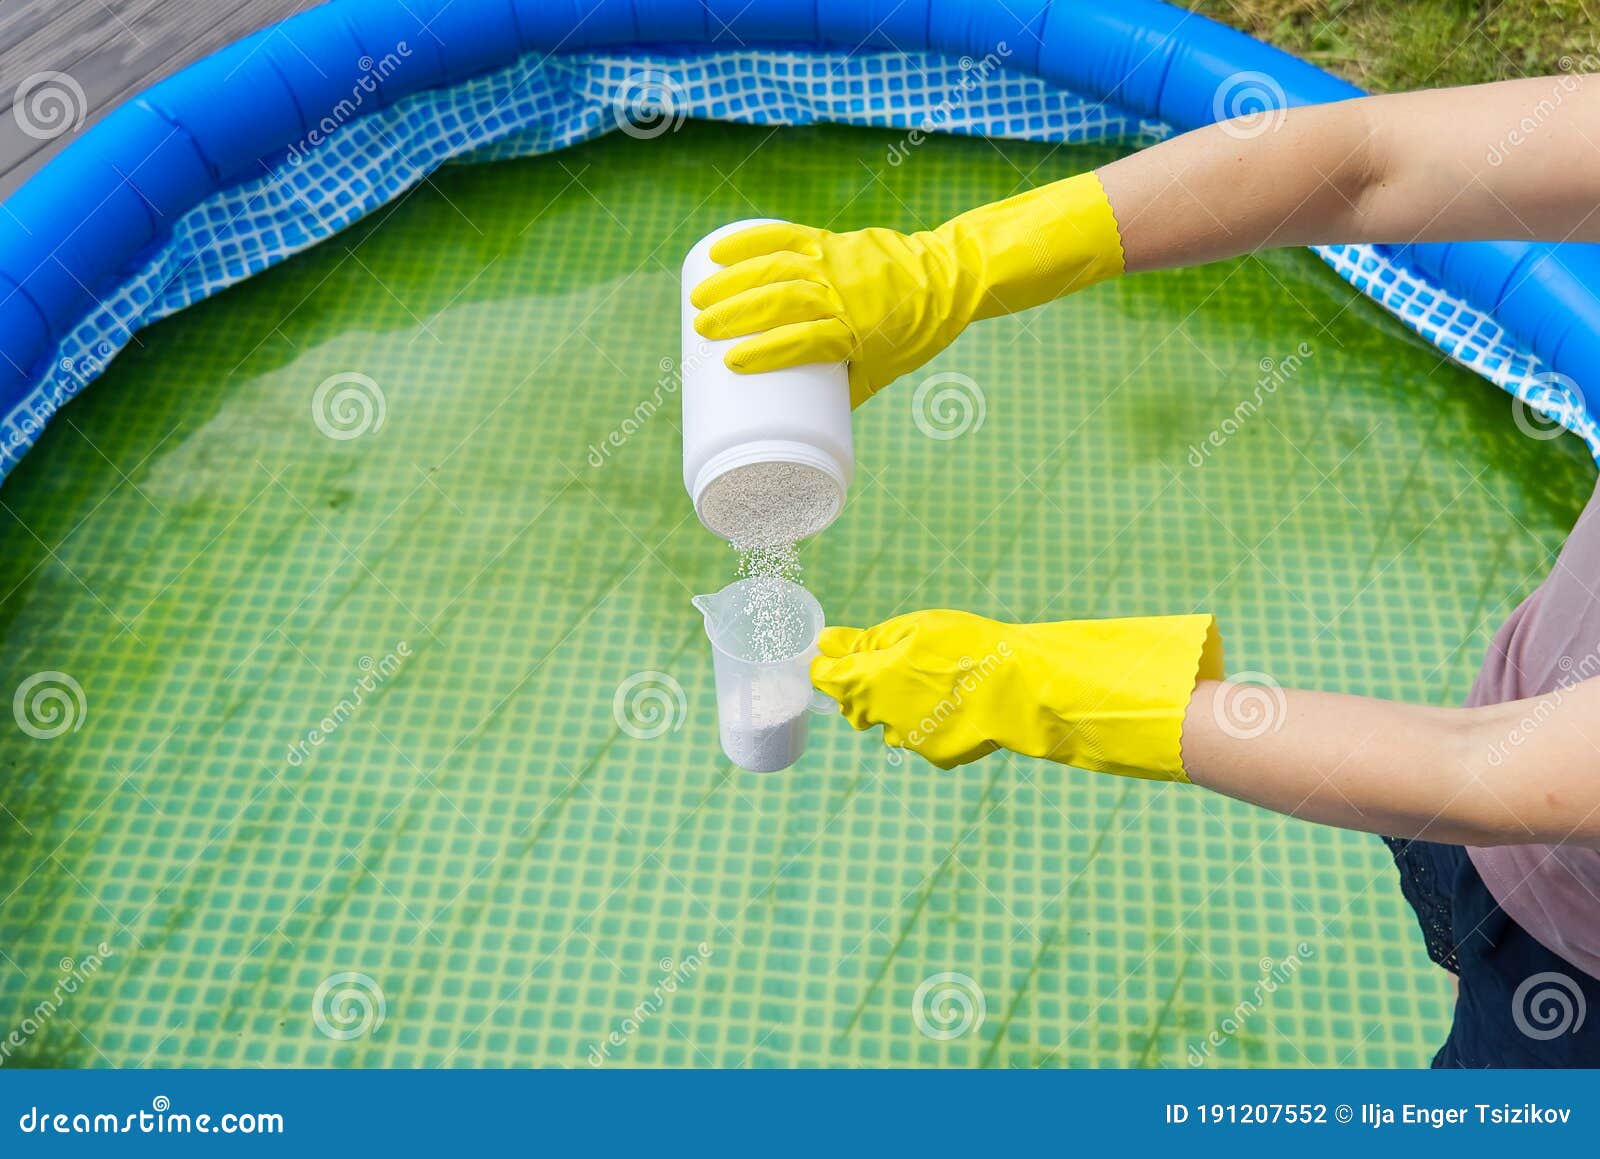 inflatable pool care